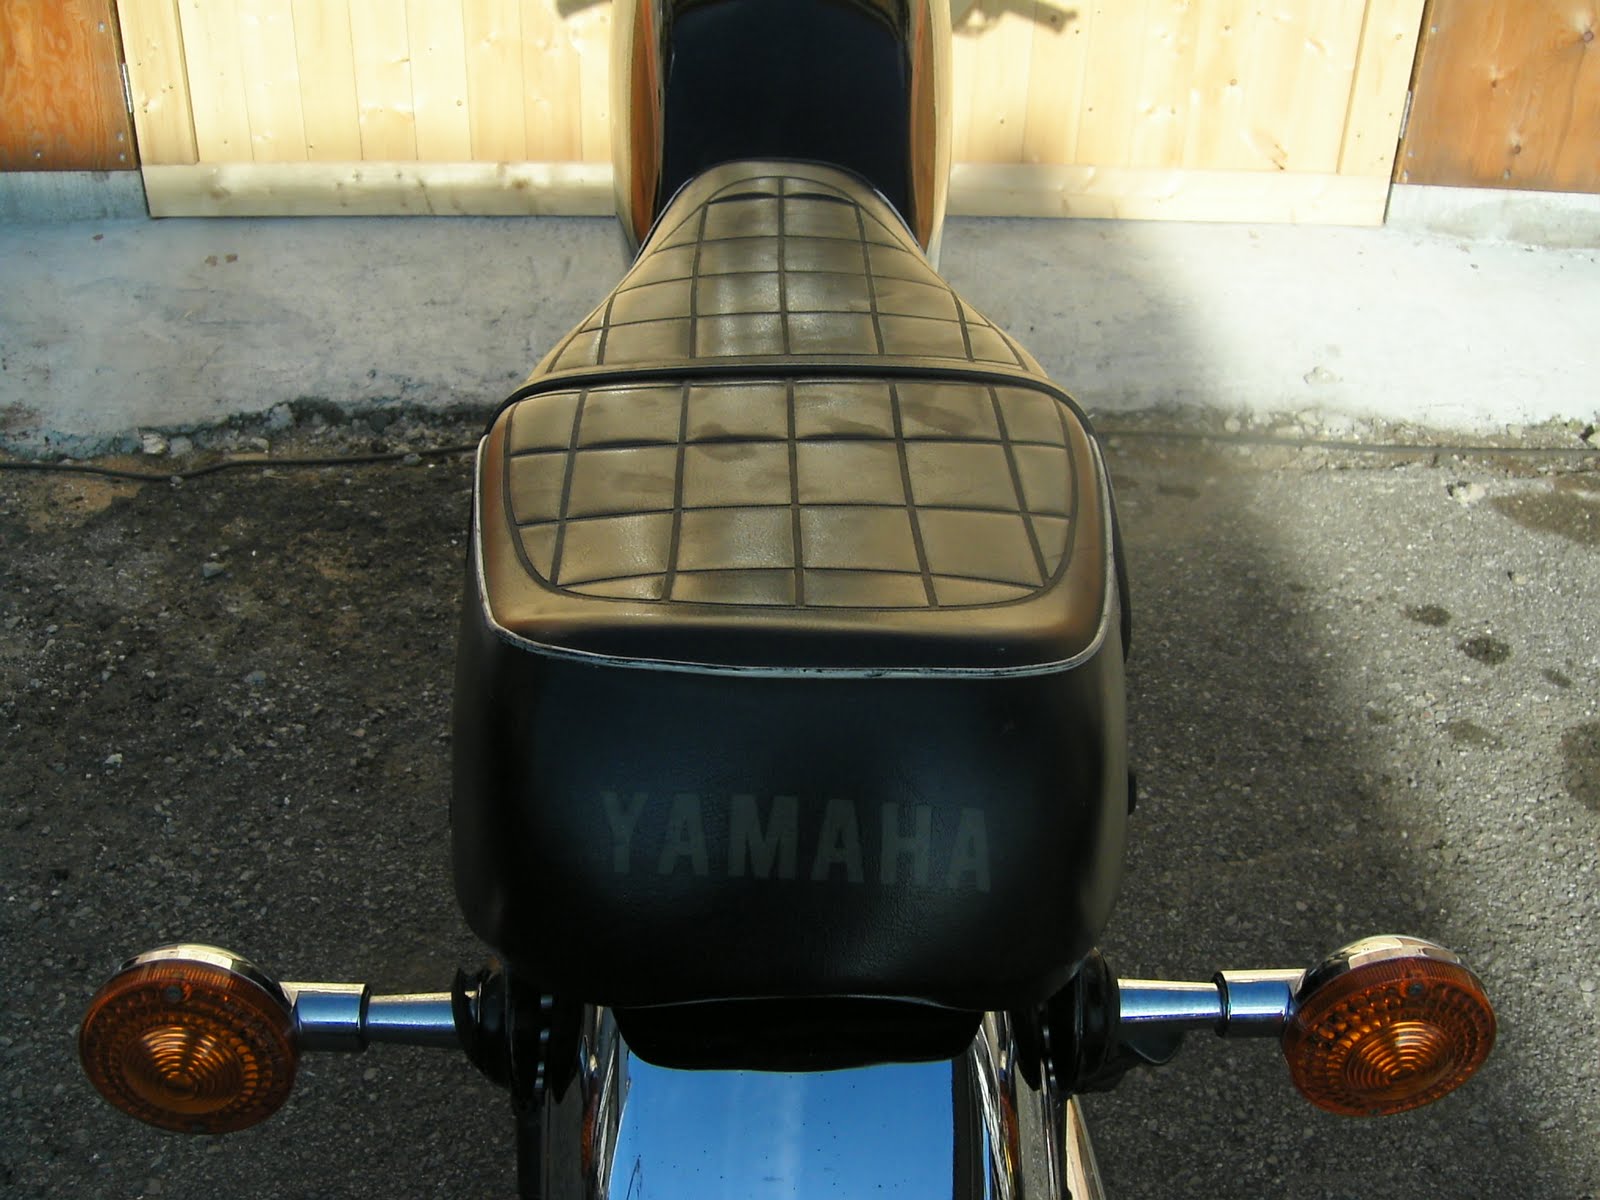 Short time long trip: 82’ YAMAHA SR400 Sold Out!!